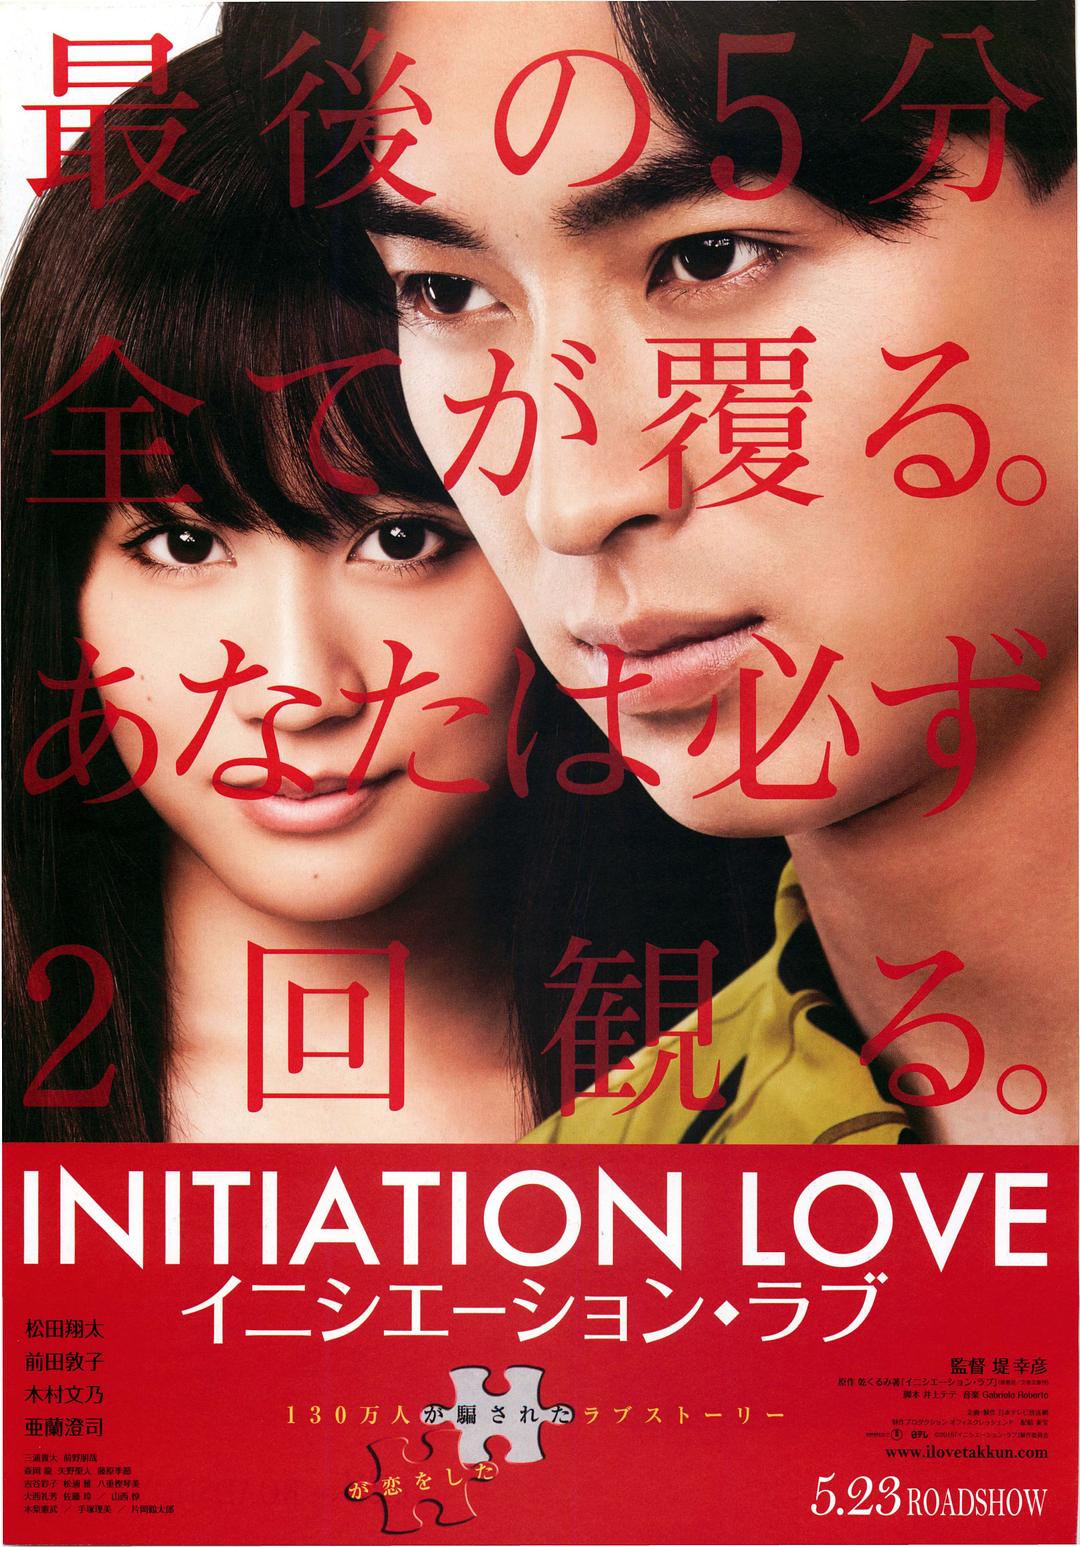 ĳʽ Initiation.Love.2015.JAPANESE.1080p.BluRay.x264.DTS-WiKi 12.25GB-1.png